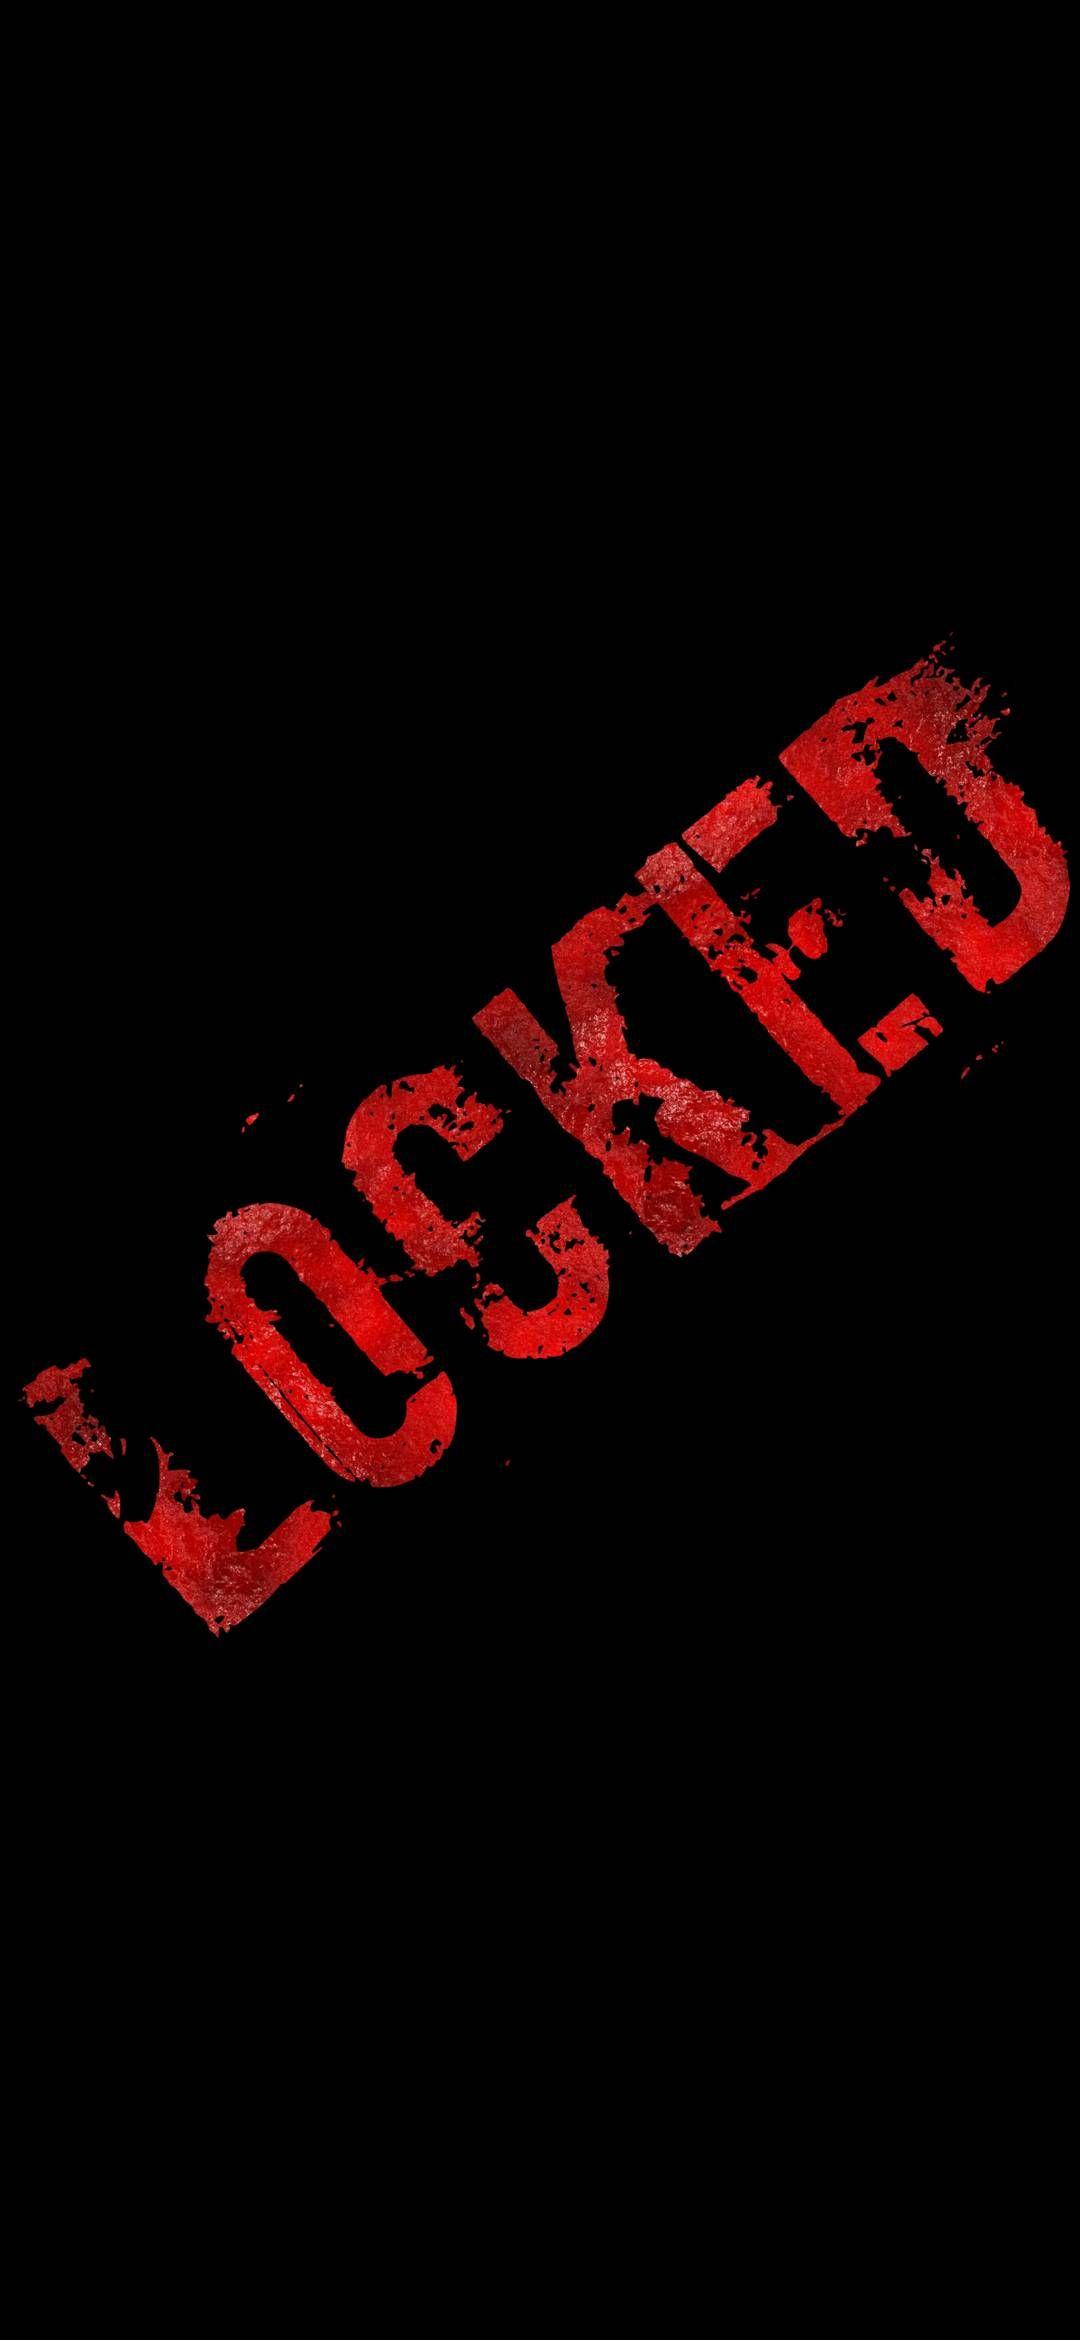 Locked Screen Wallpapers - Top Free Locked Screen Backgrounds